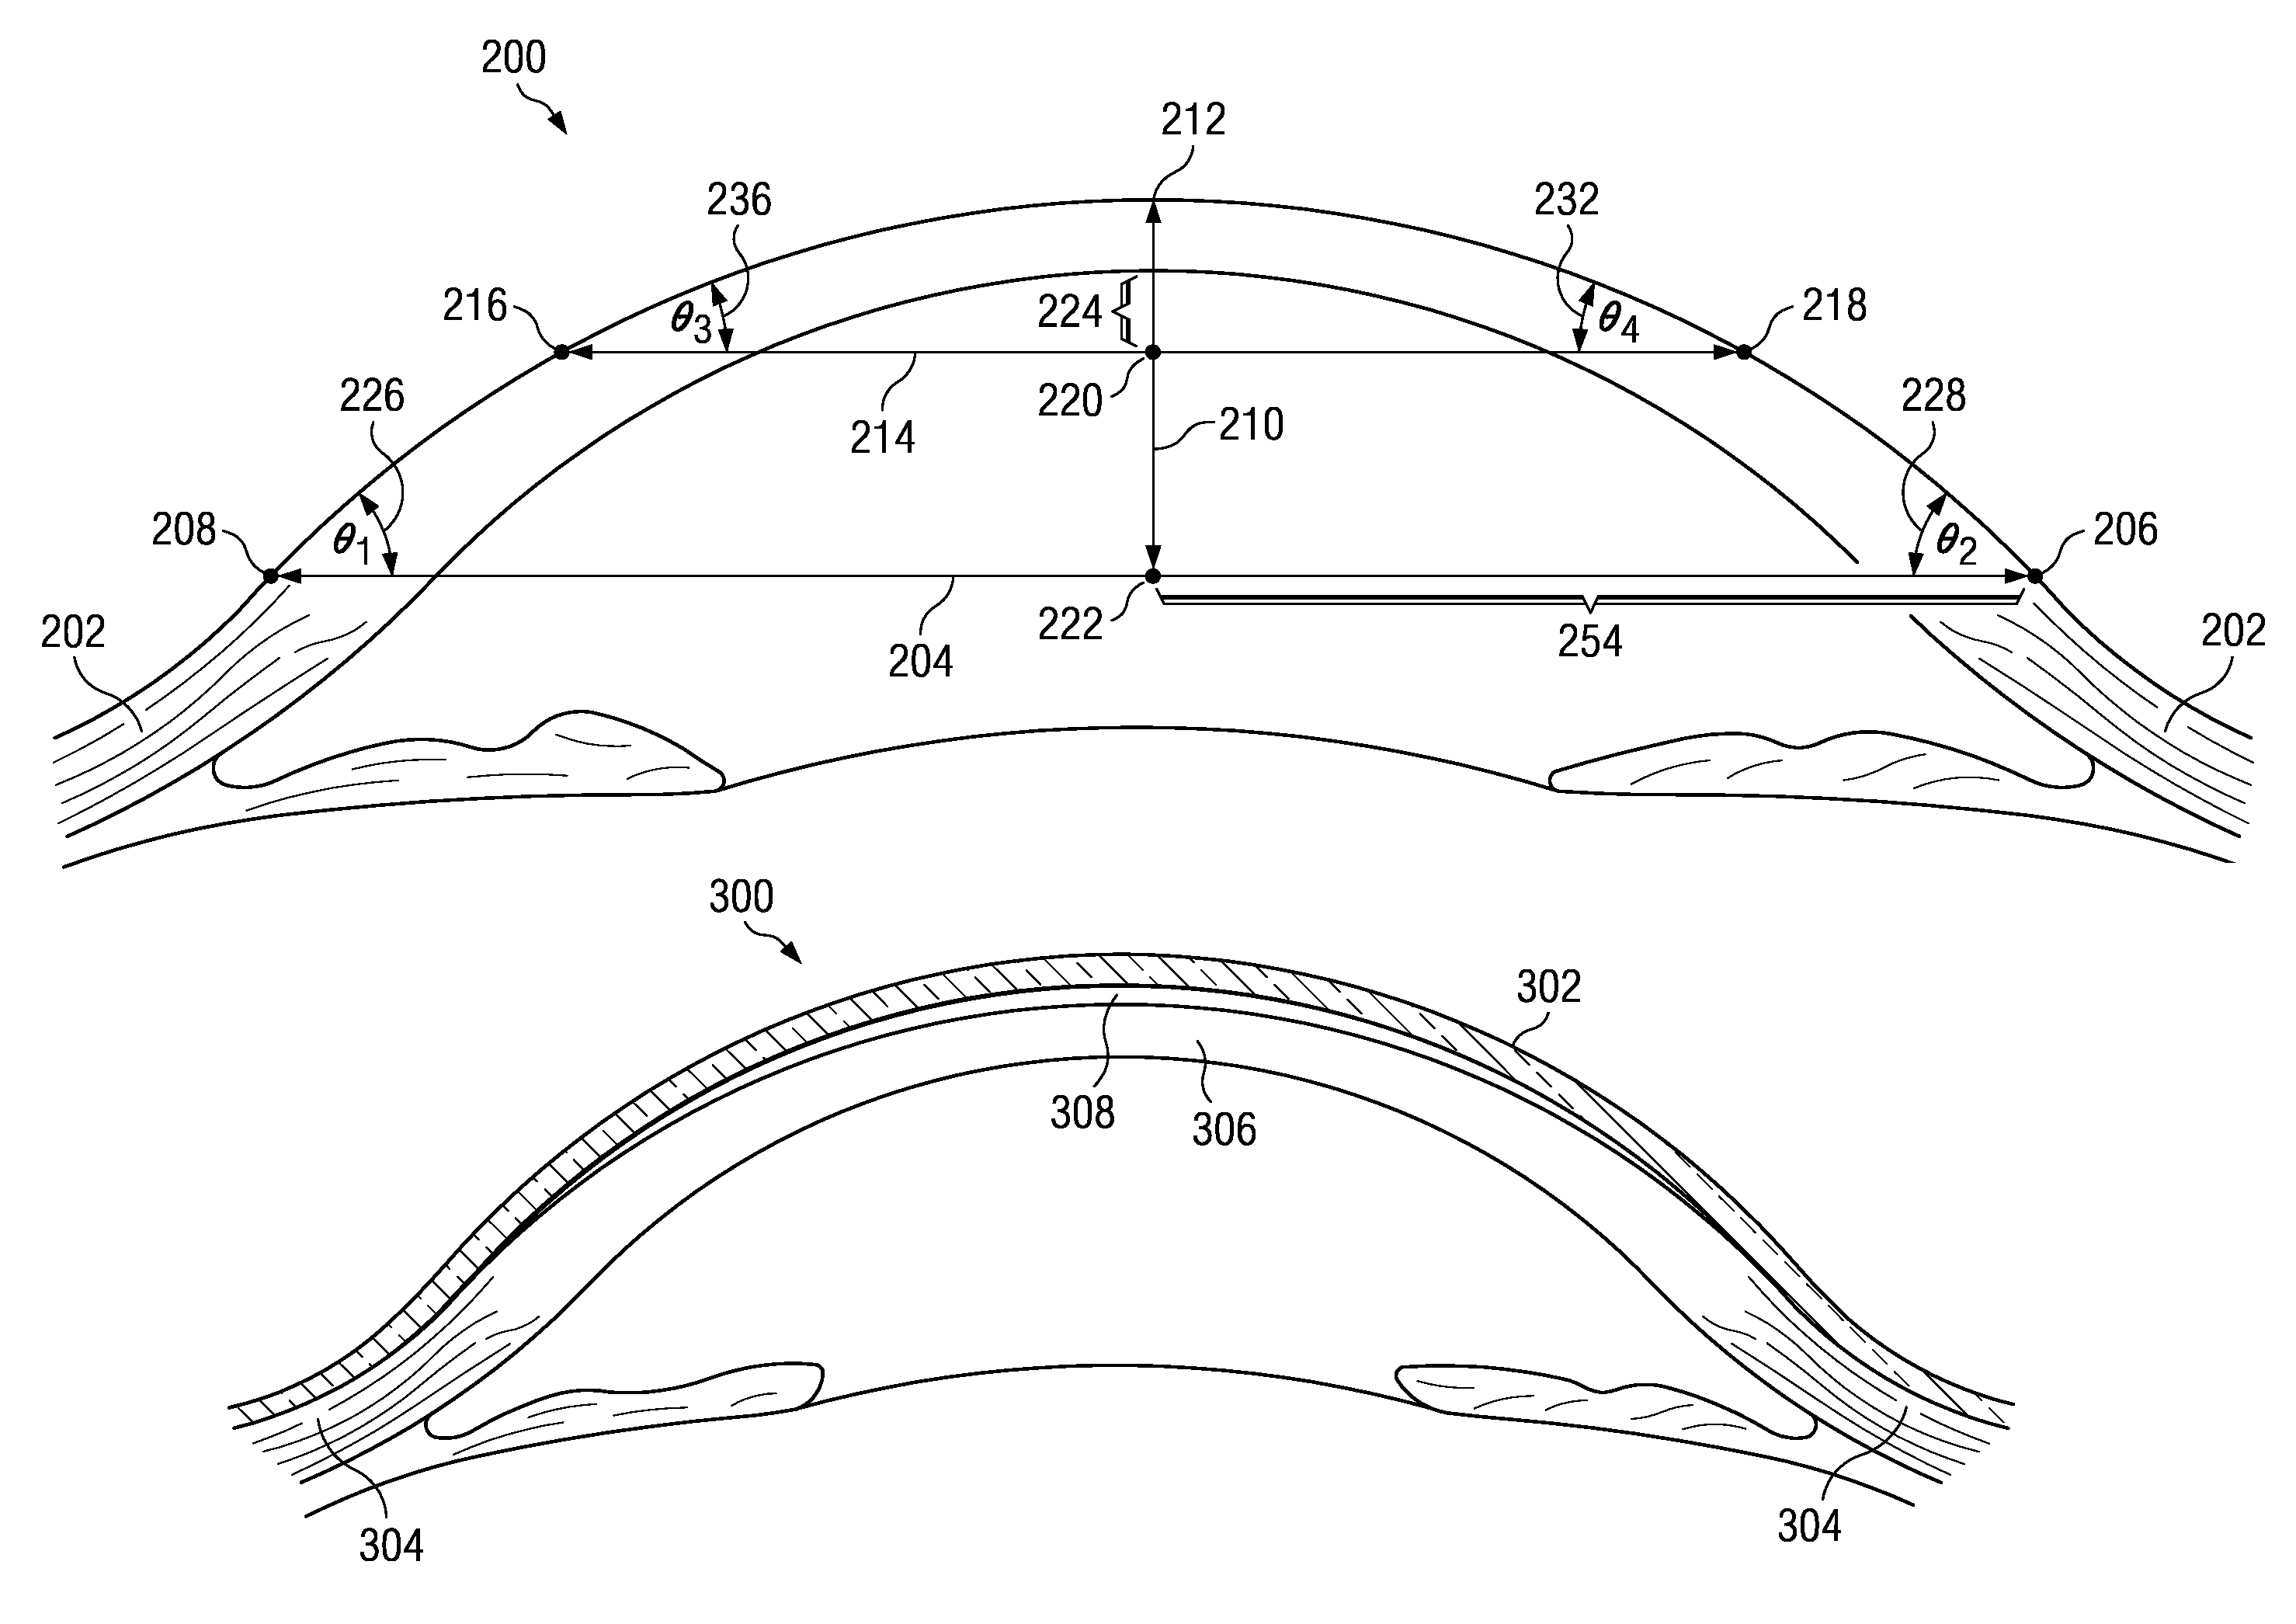 Method of fitting rigid gas-permeable contact lenses from high resolution imaging